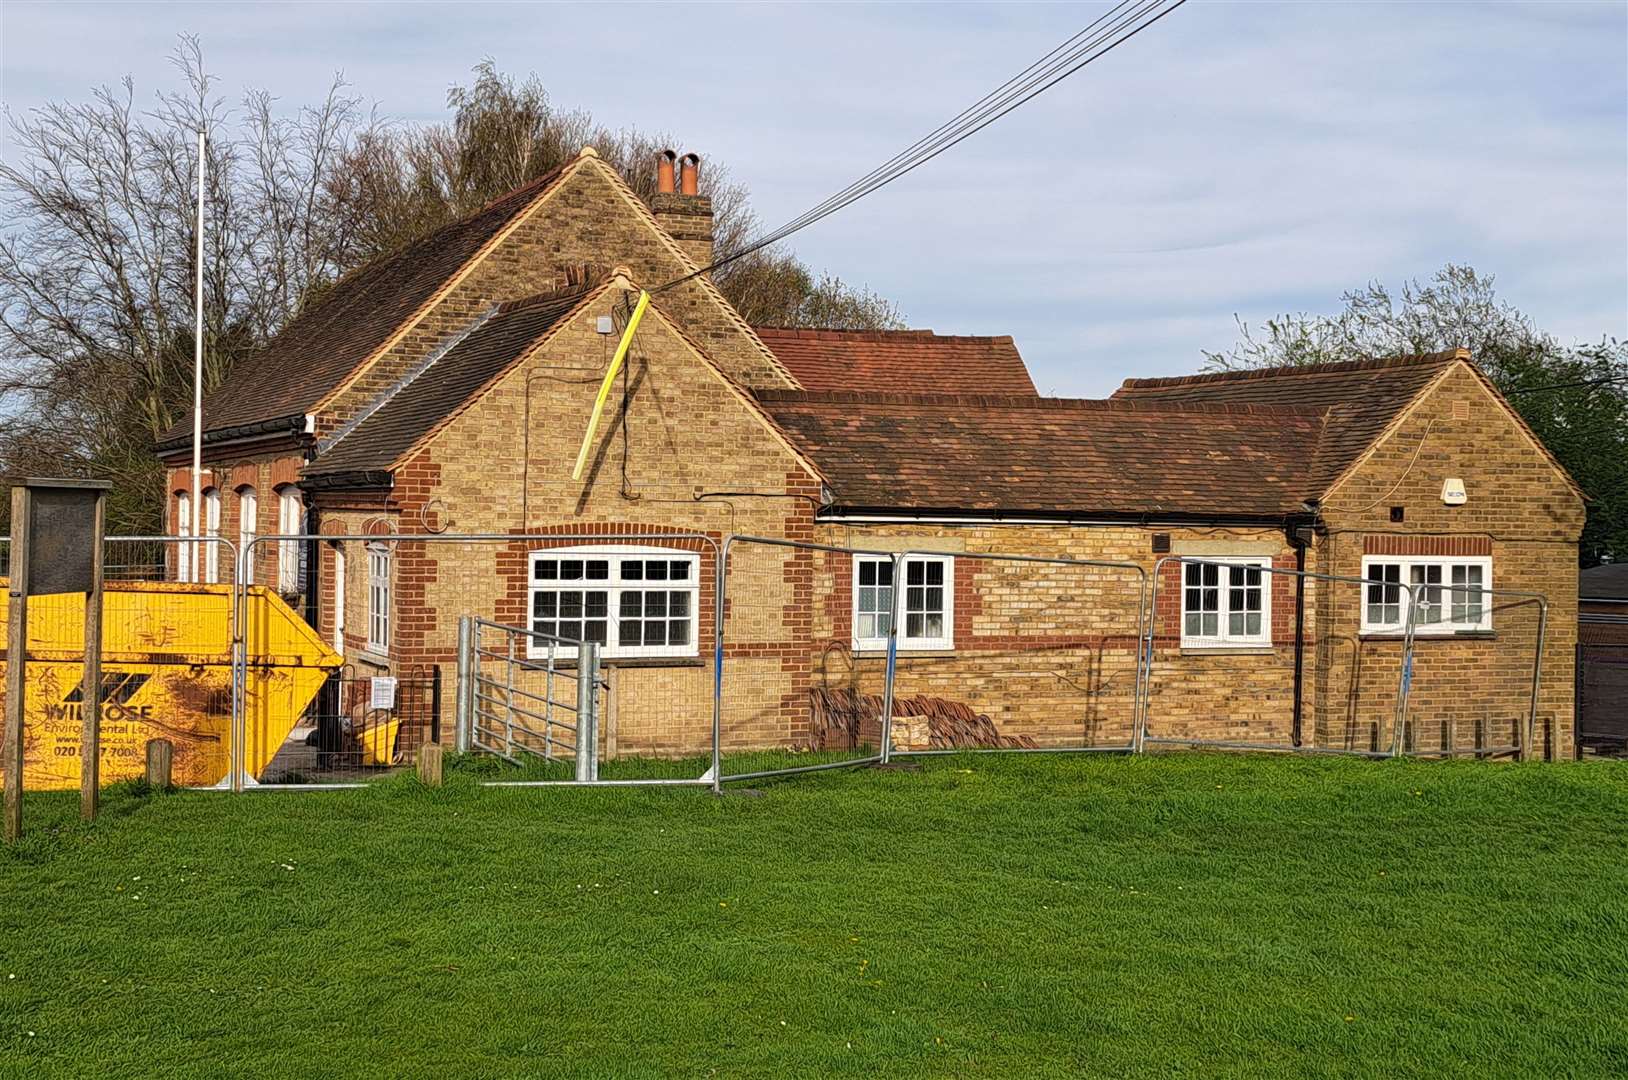 Rodmersham Primary School will reopen in May